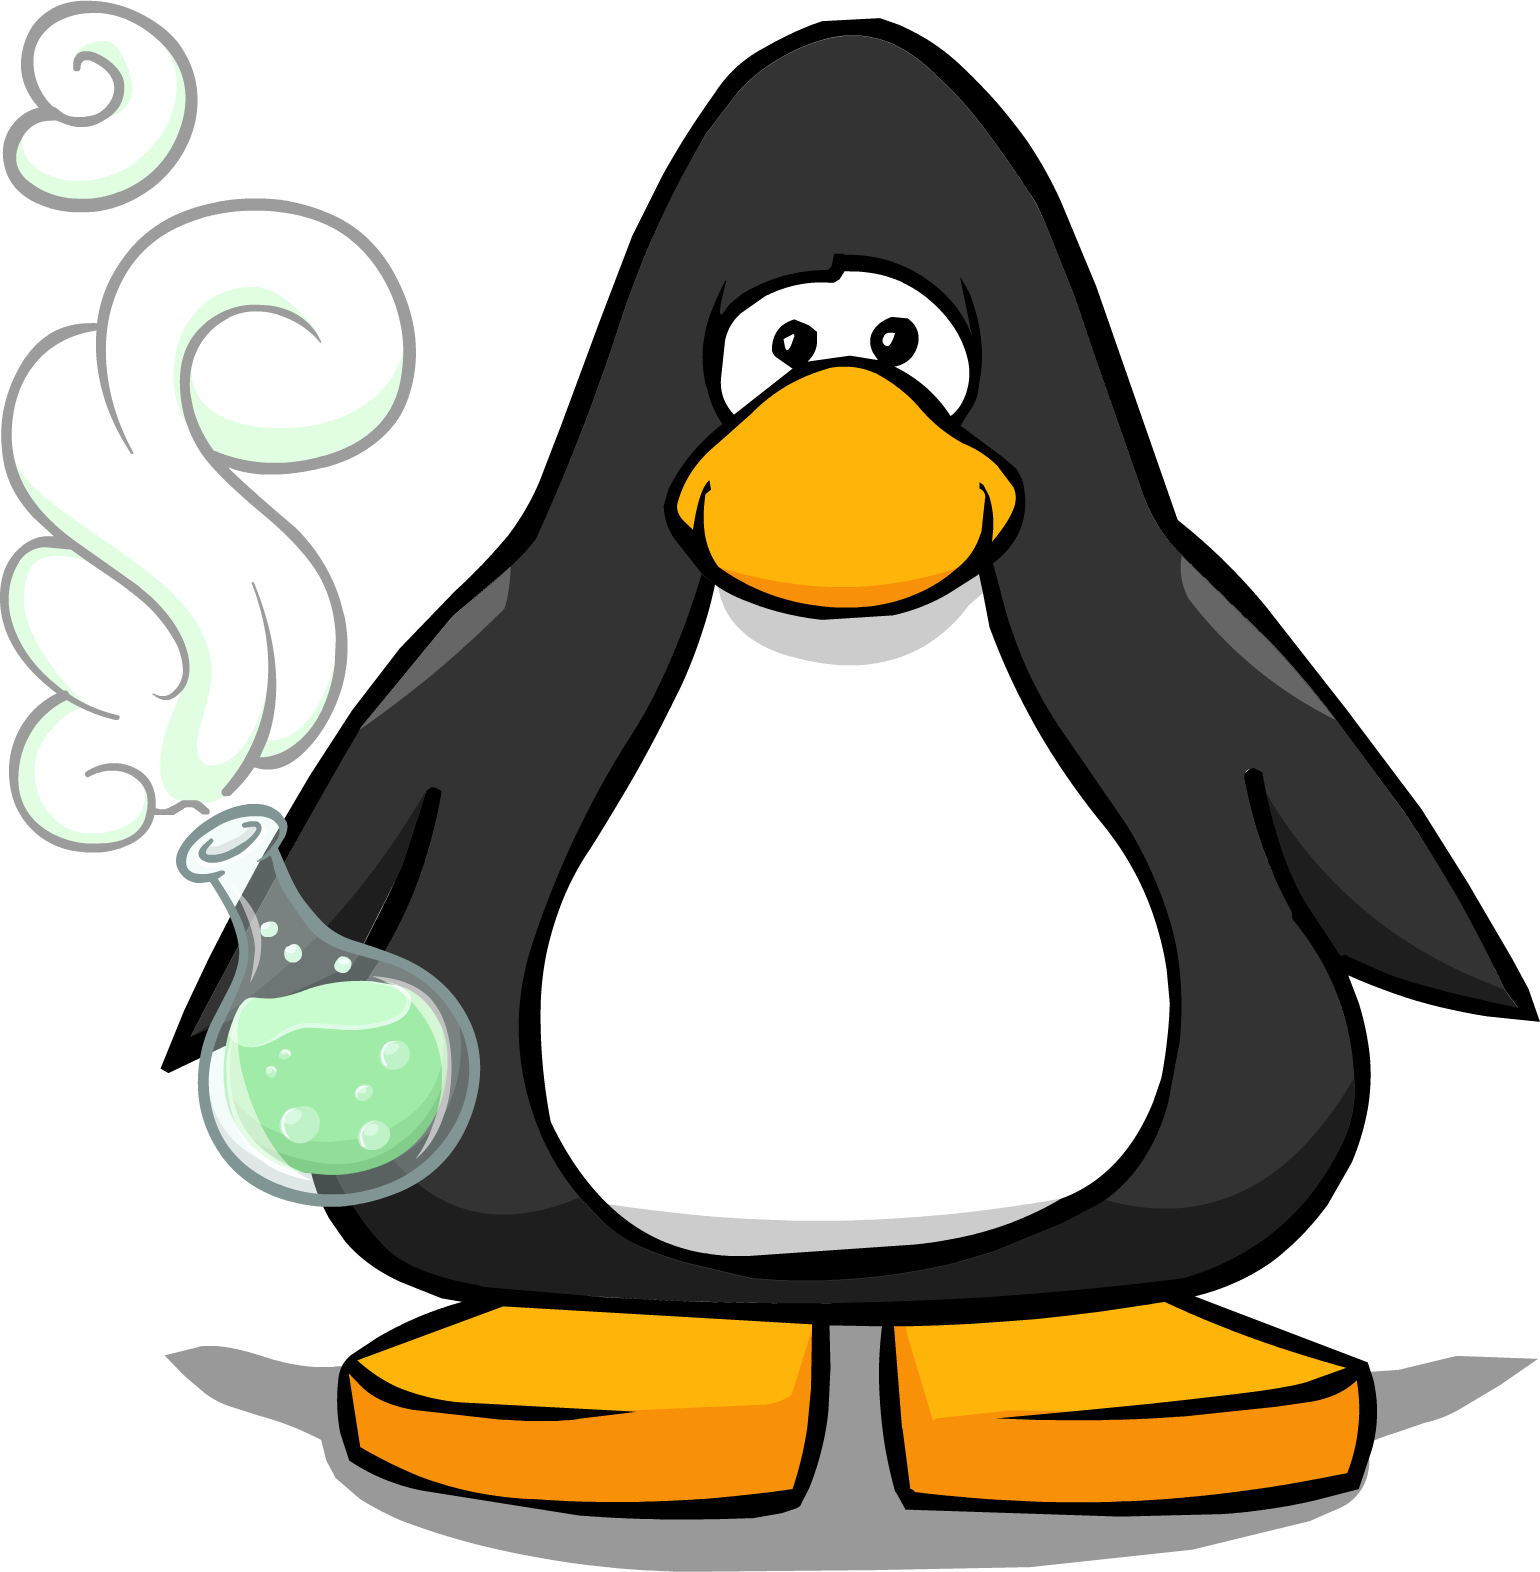 Magic Potion From A Player Card - Club Penguin The Popstar (1540x1572)